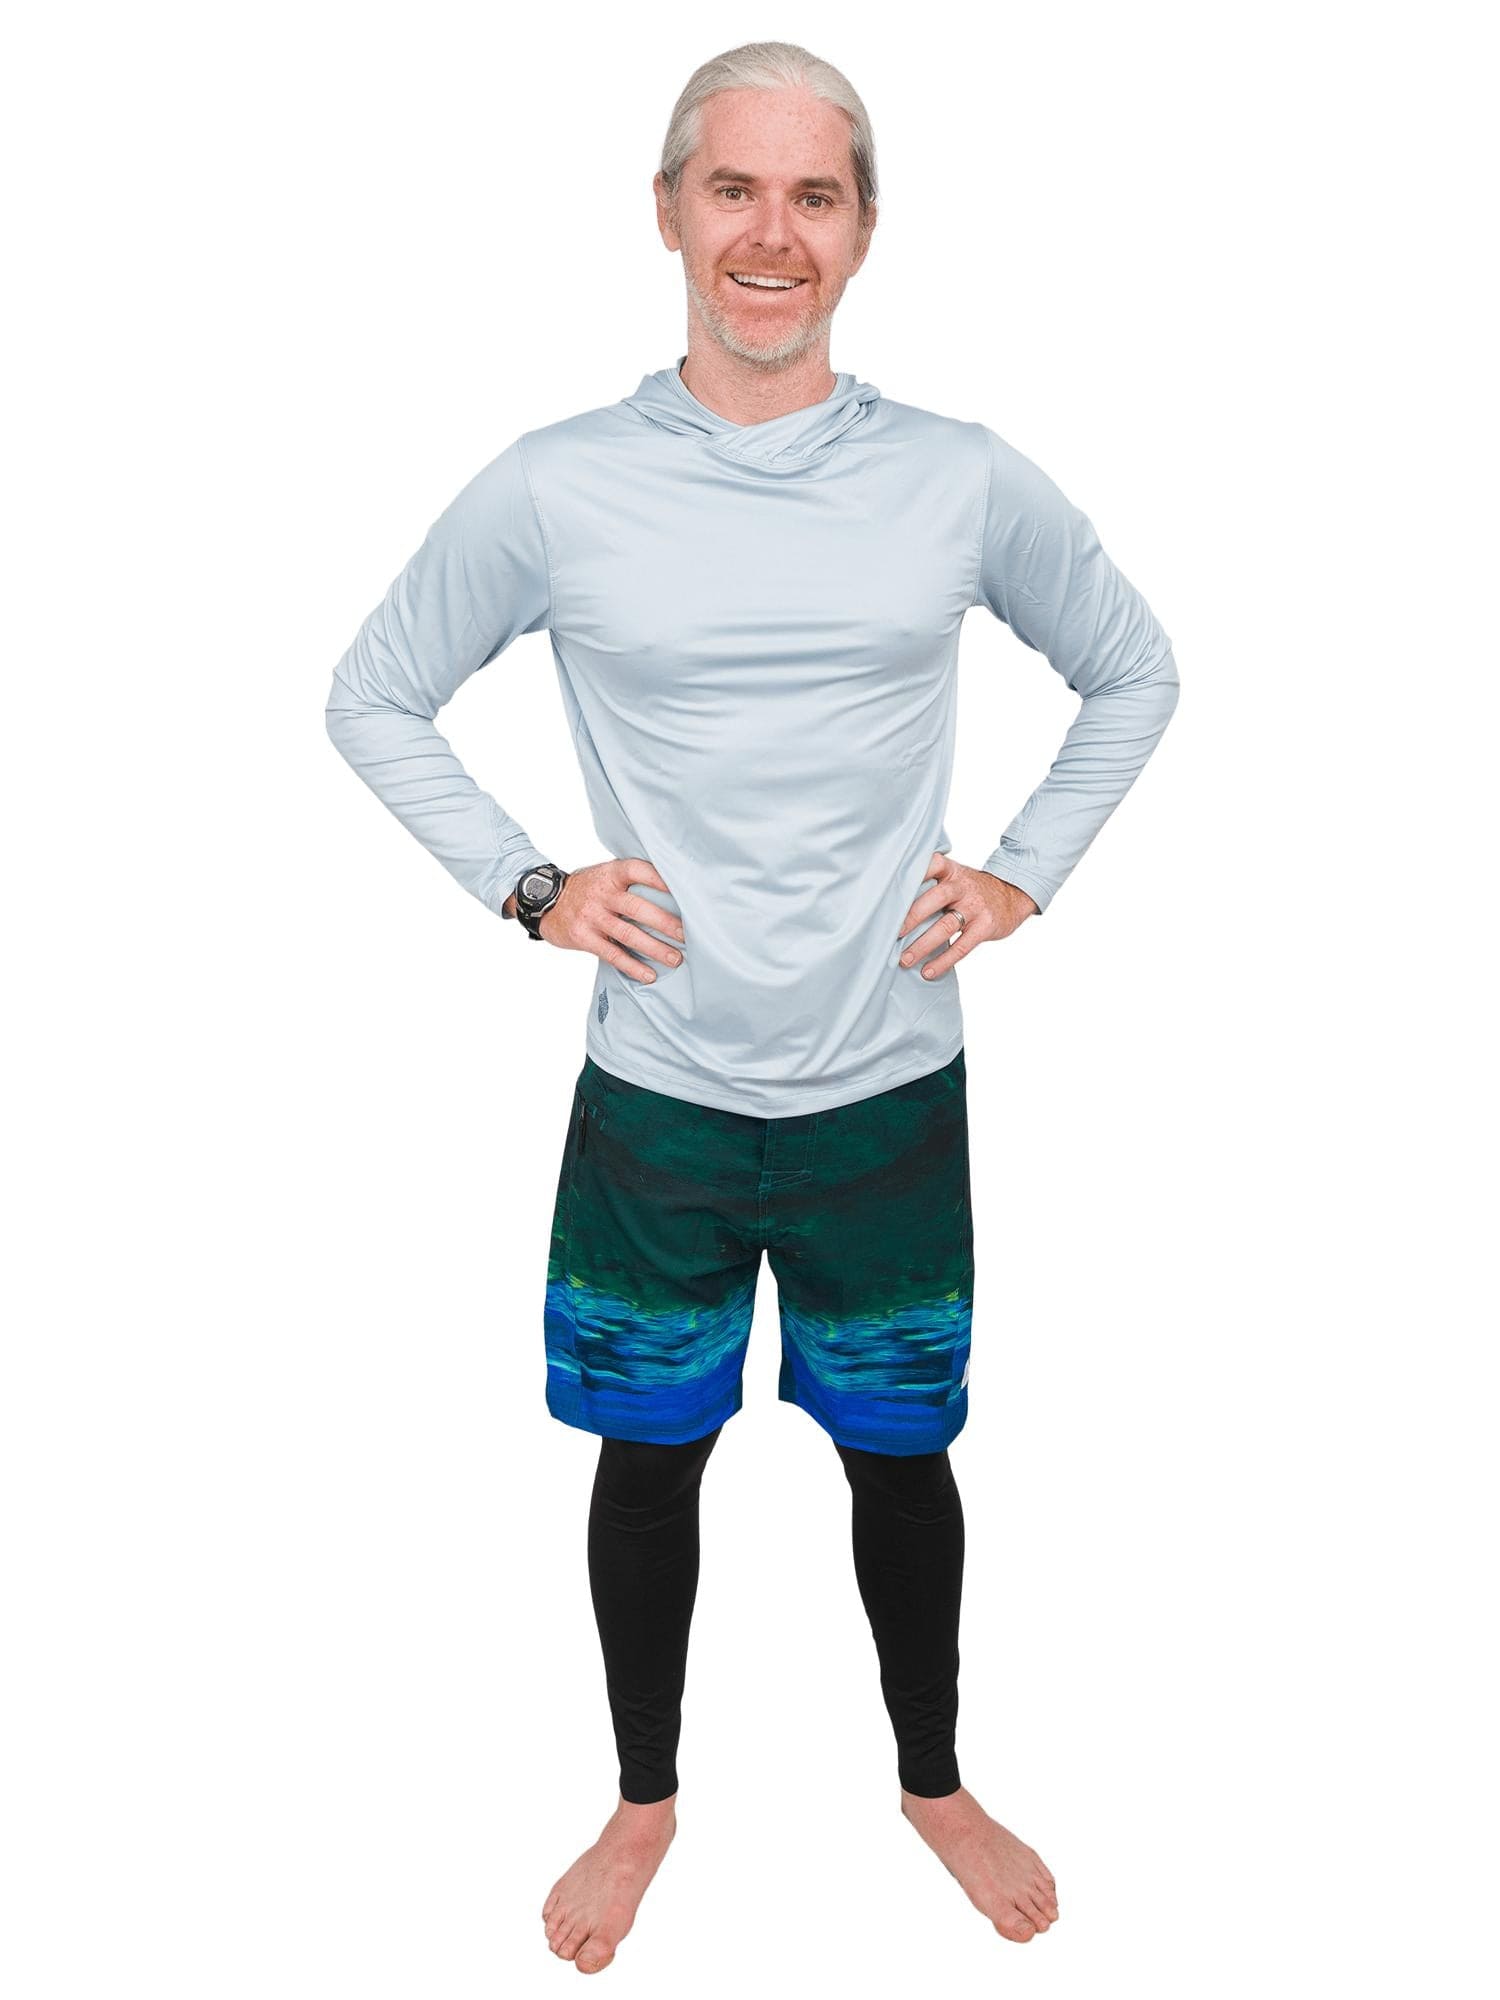 Men's Running Leggings Men in Tights  Recycled and recyclable – Circle  Sportswear